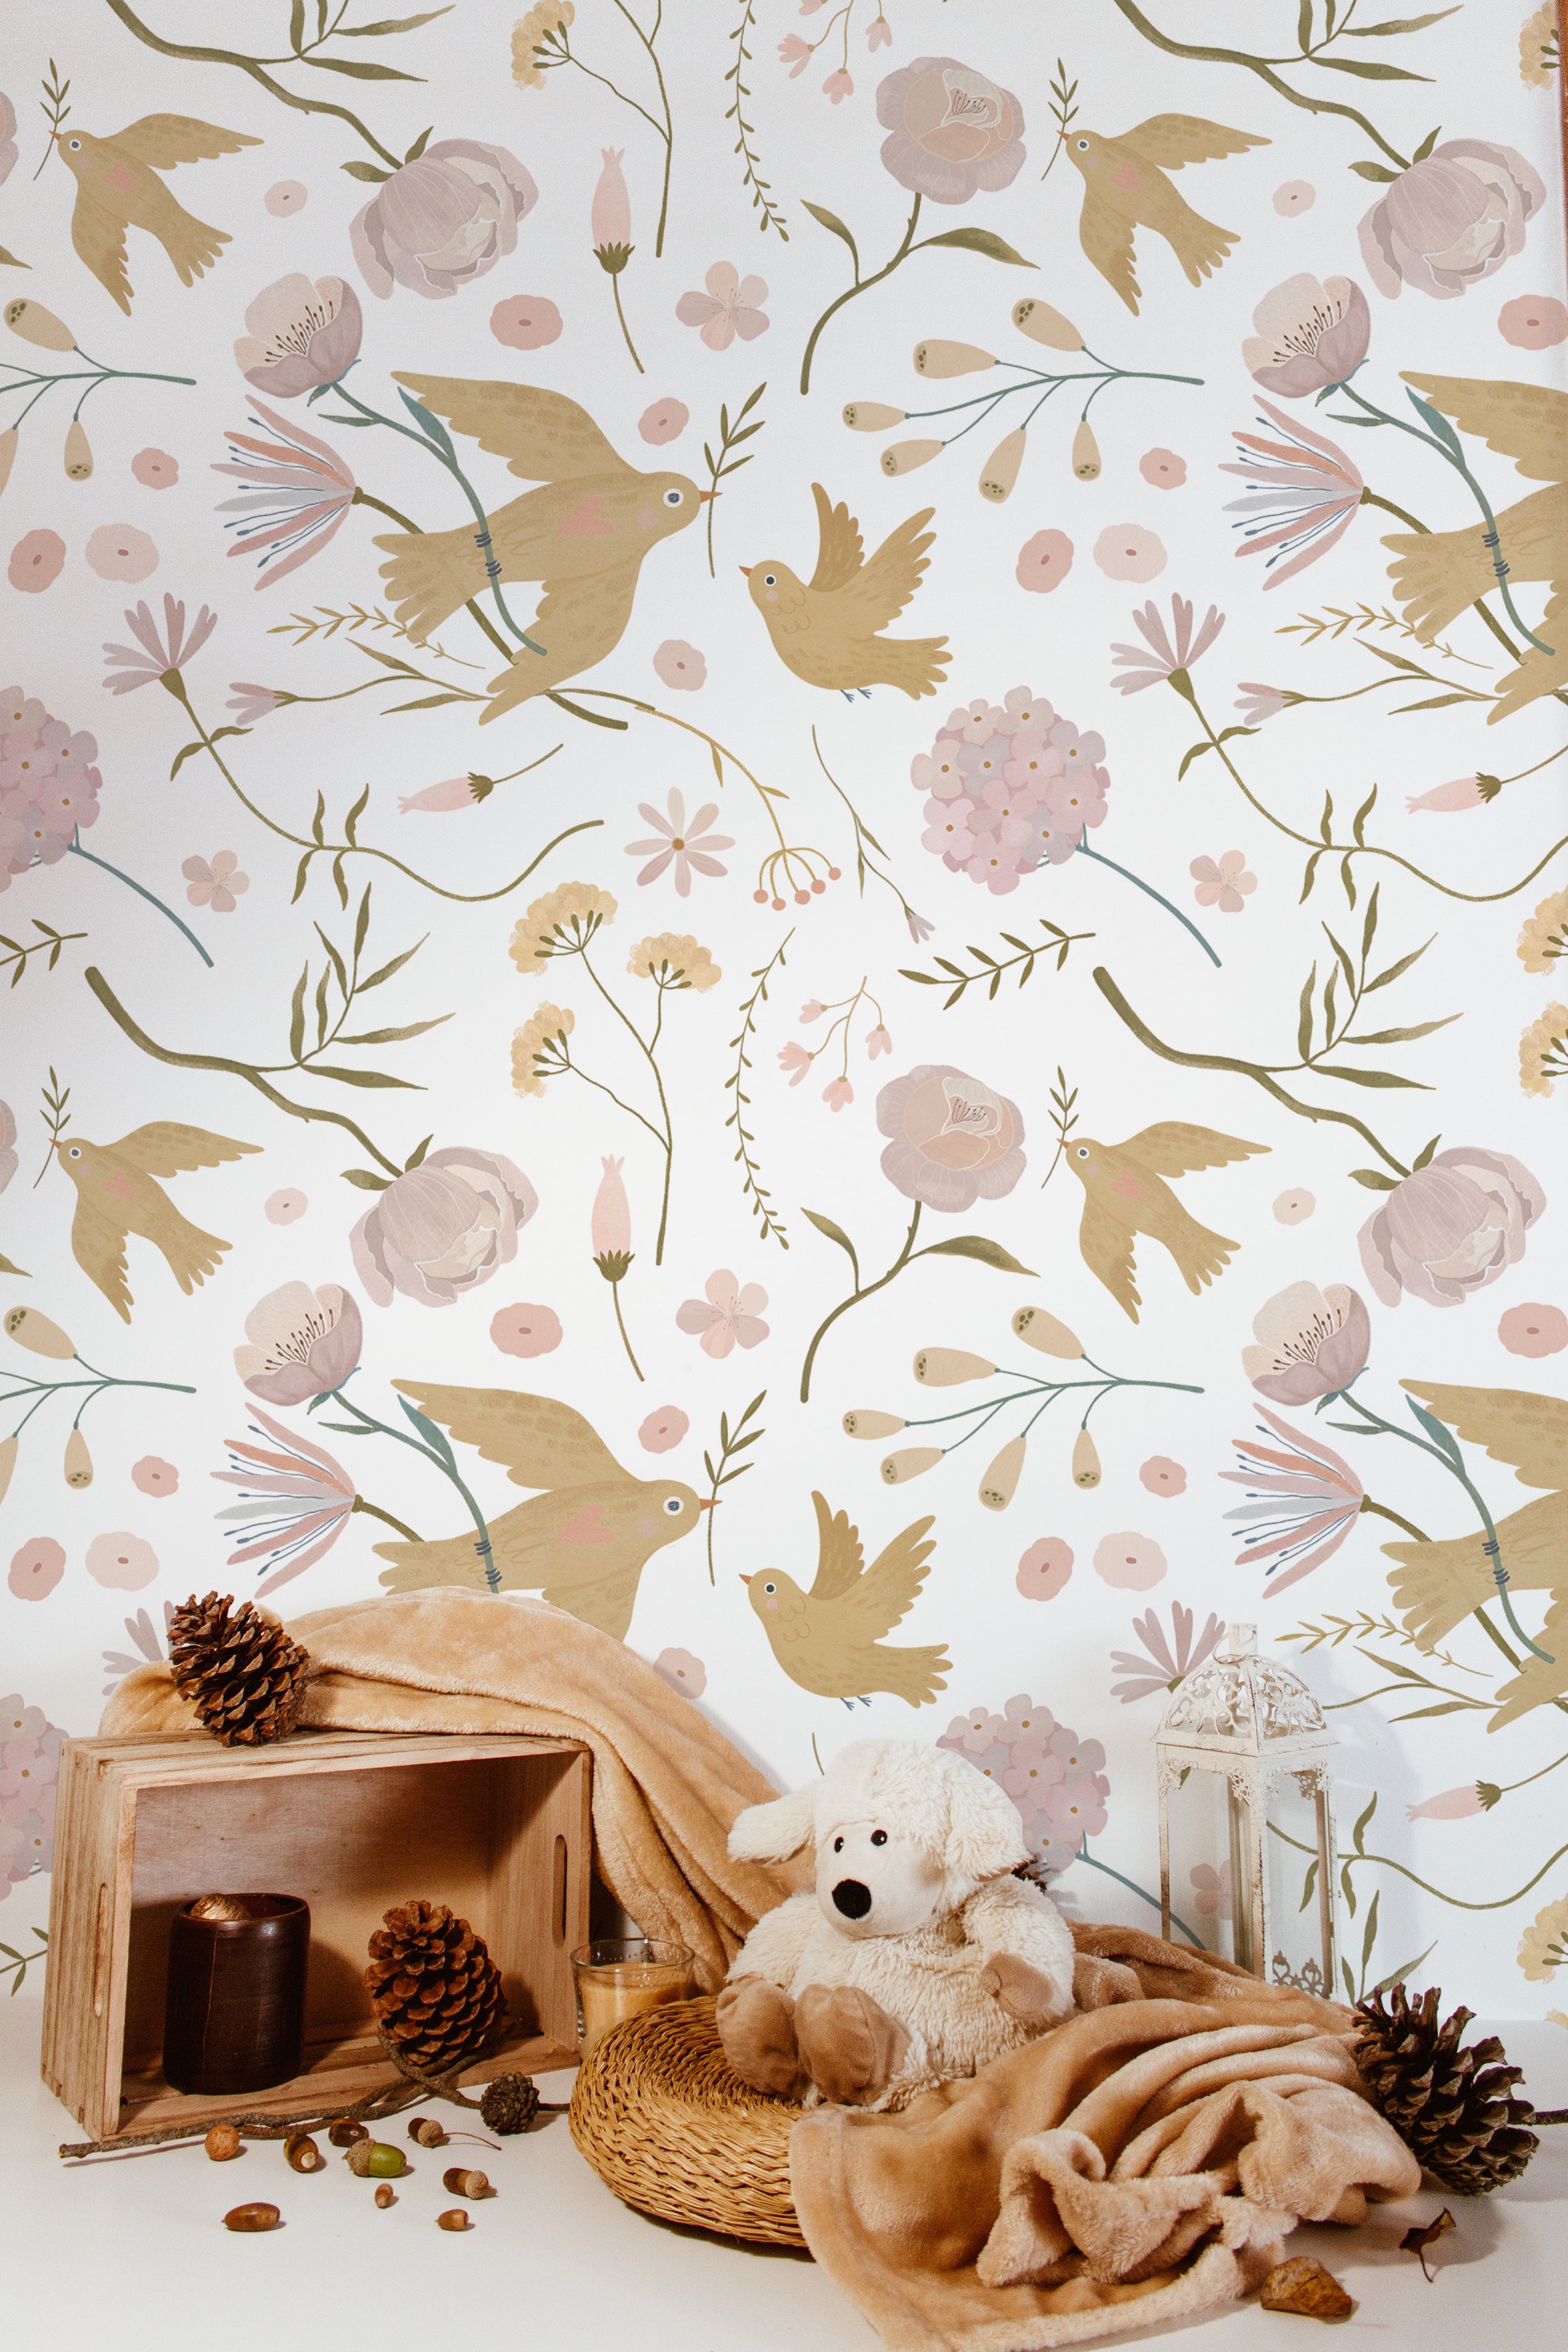 Children's nursery adorned with Pastel Garden Wallpaper II - 25 inch, showcasing whimsical bird and flower illustrations in gentle pastel shades. A plush toy and natural decorations complement the serene and inviting ambiance of the room.